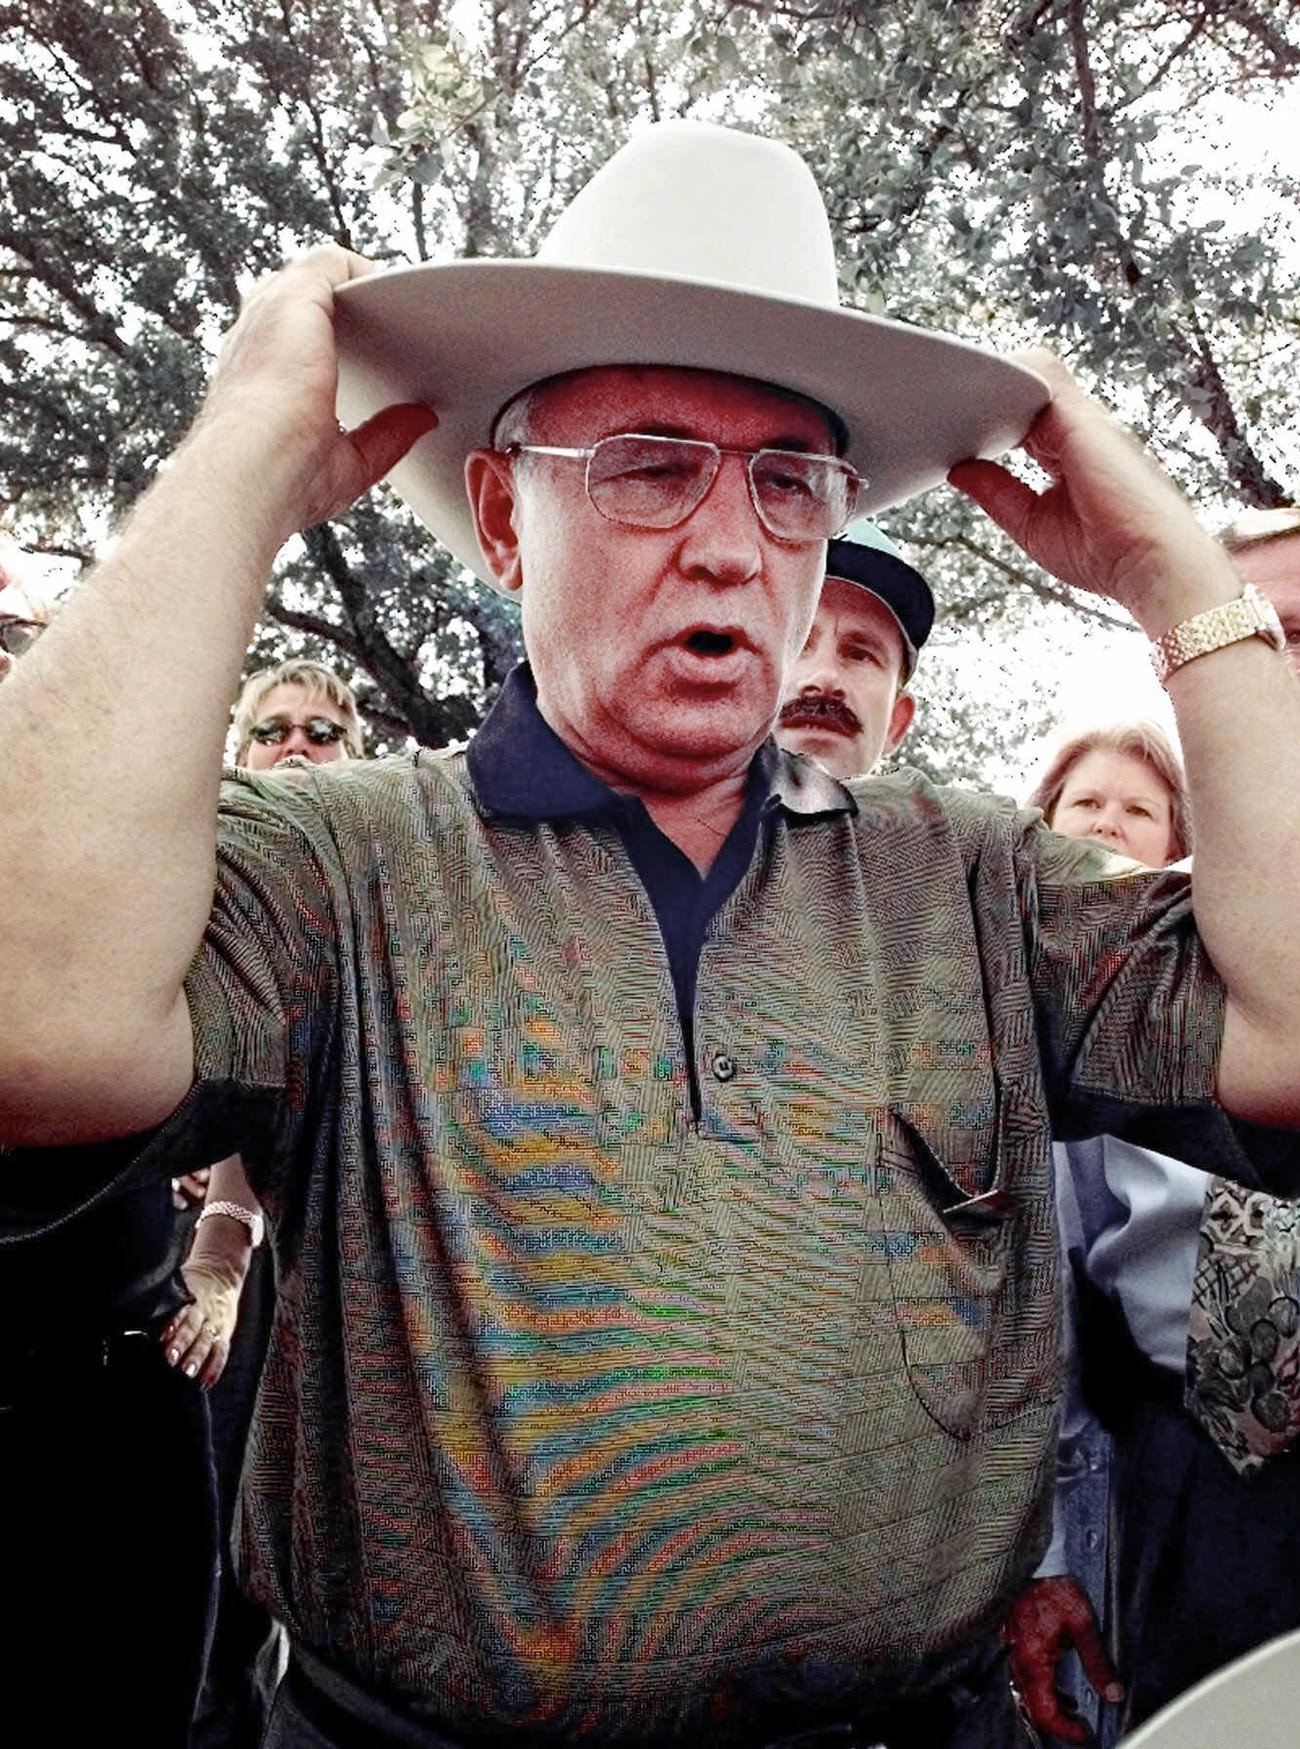 Former Soviet President Mikhail Gorbachev puts a cowboy hat on backwards during a visit to the State Fair of Texas in Dallas, 1998